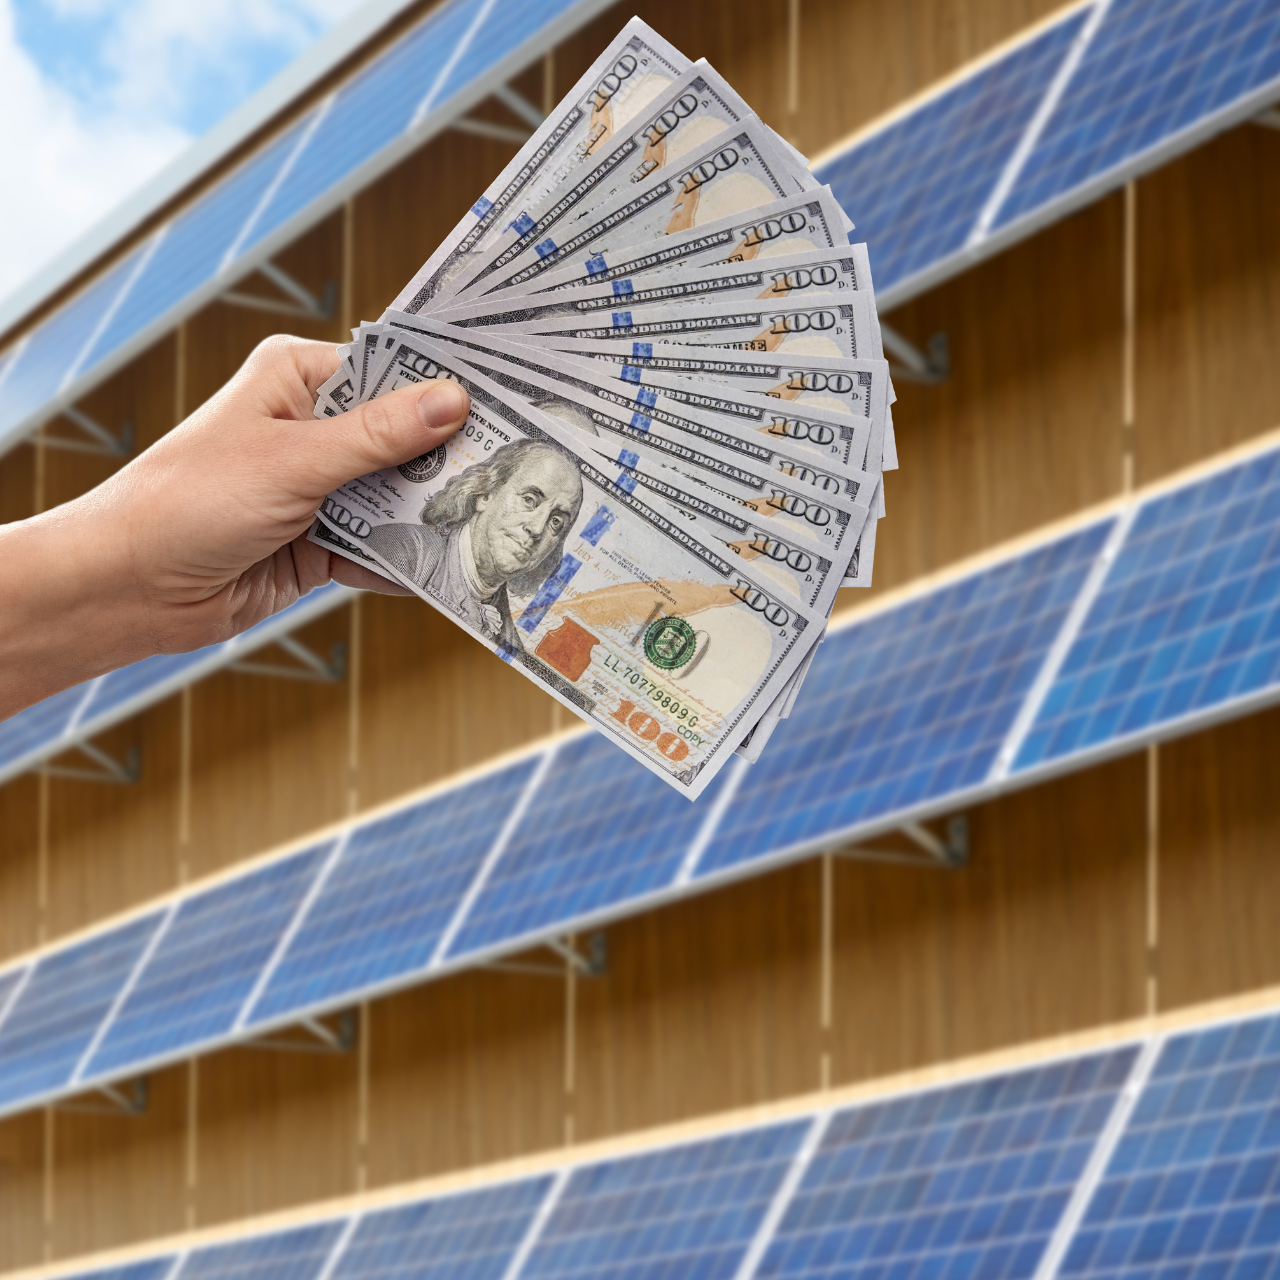 How much does a solar panel cost in Canada?